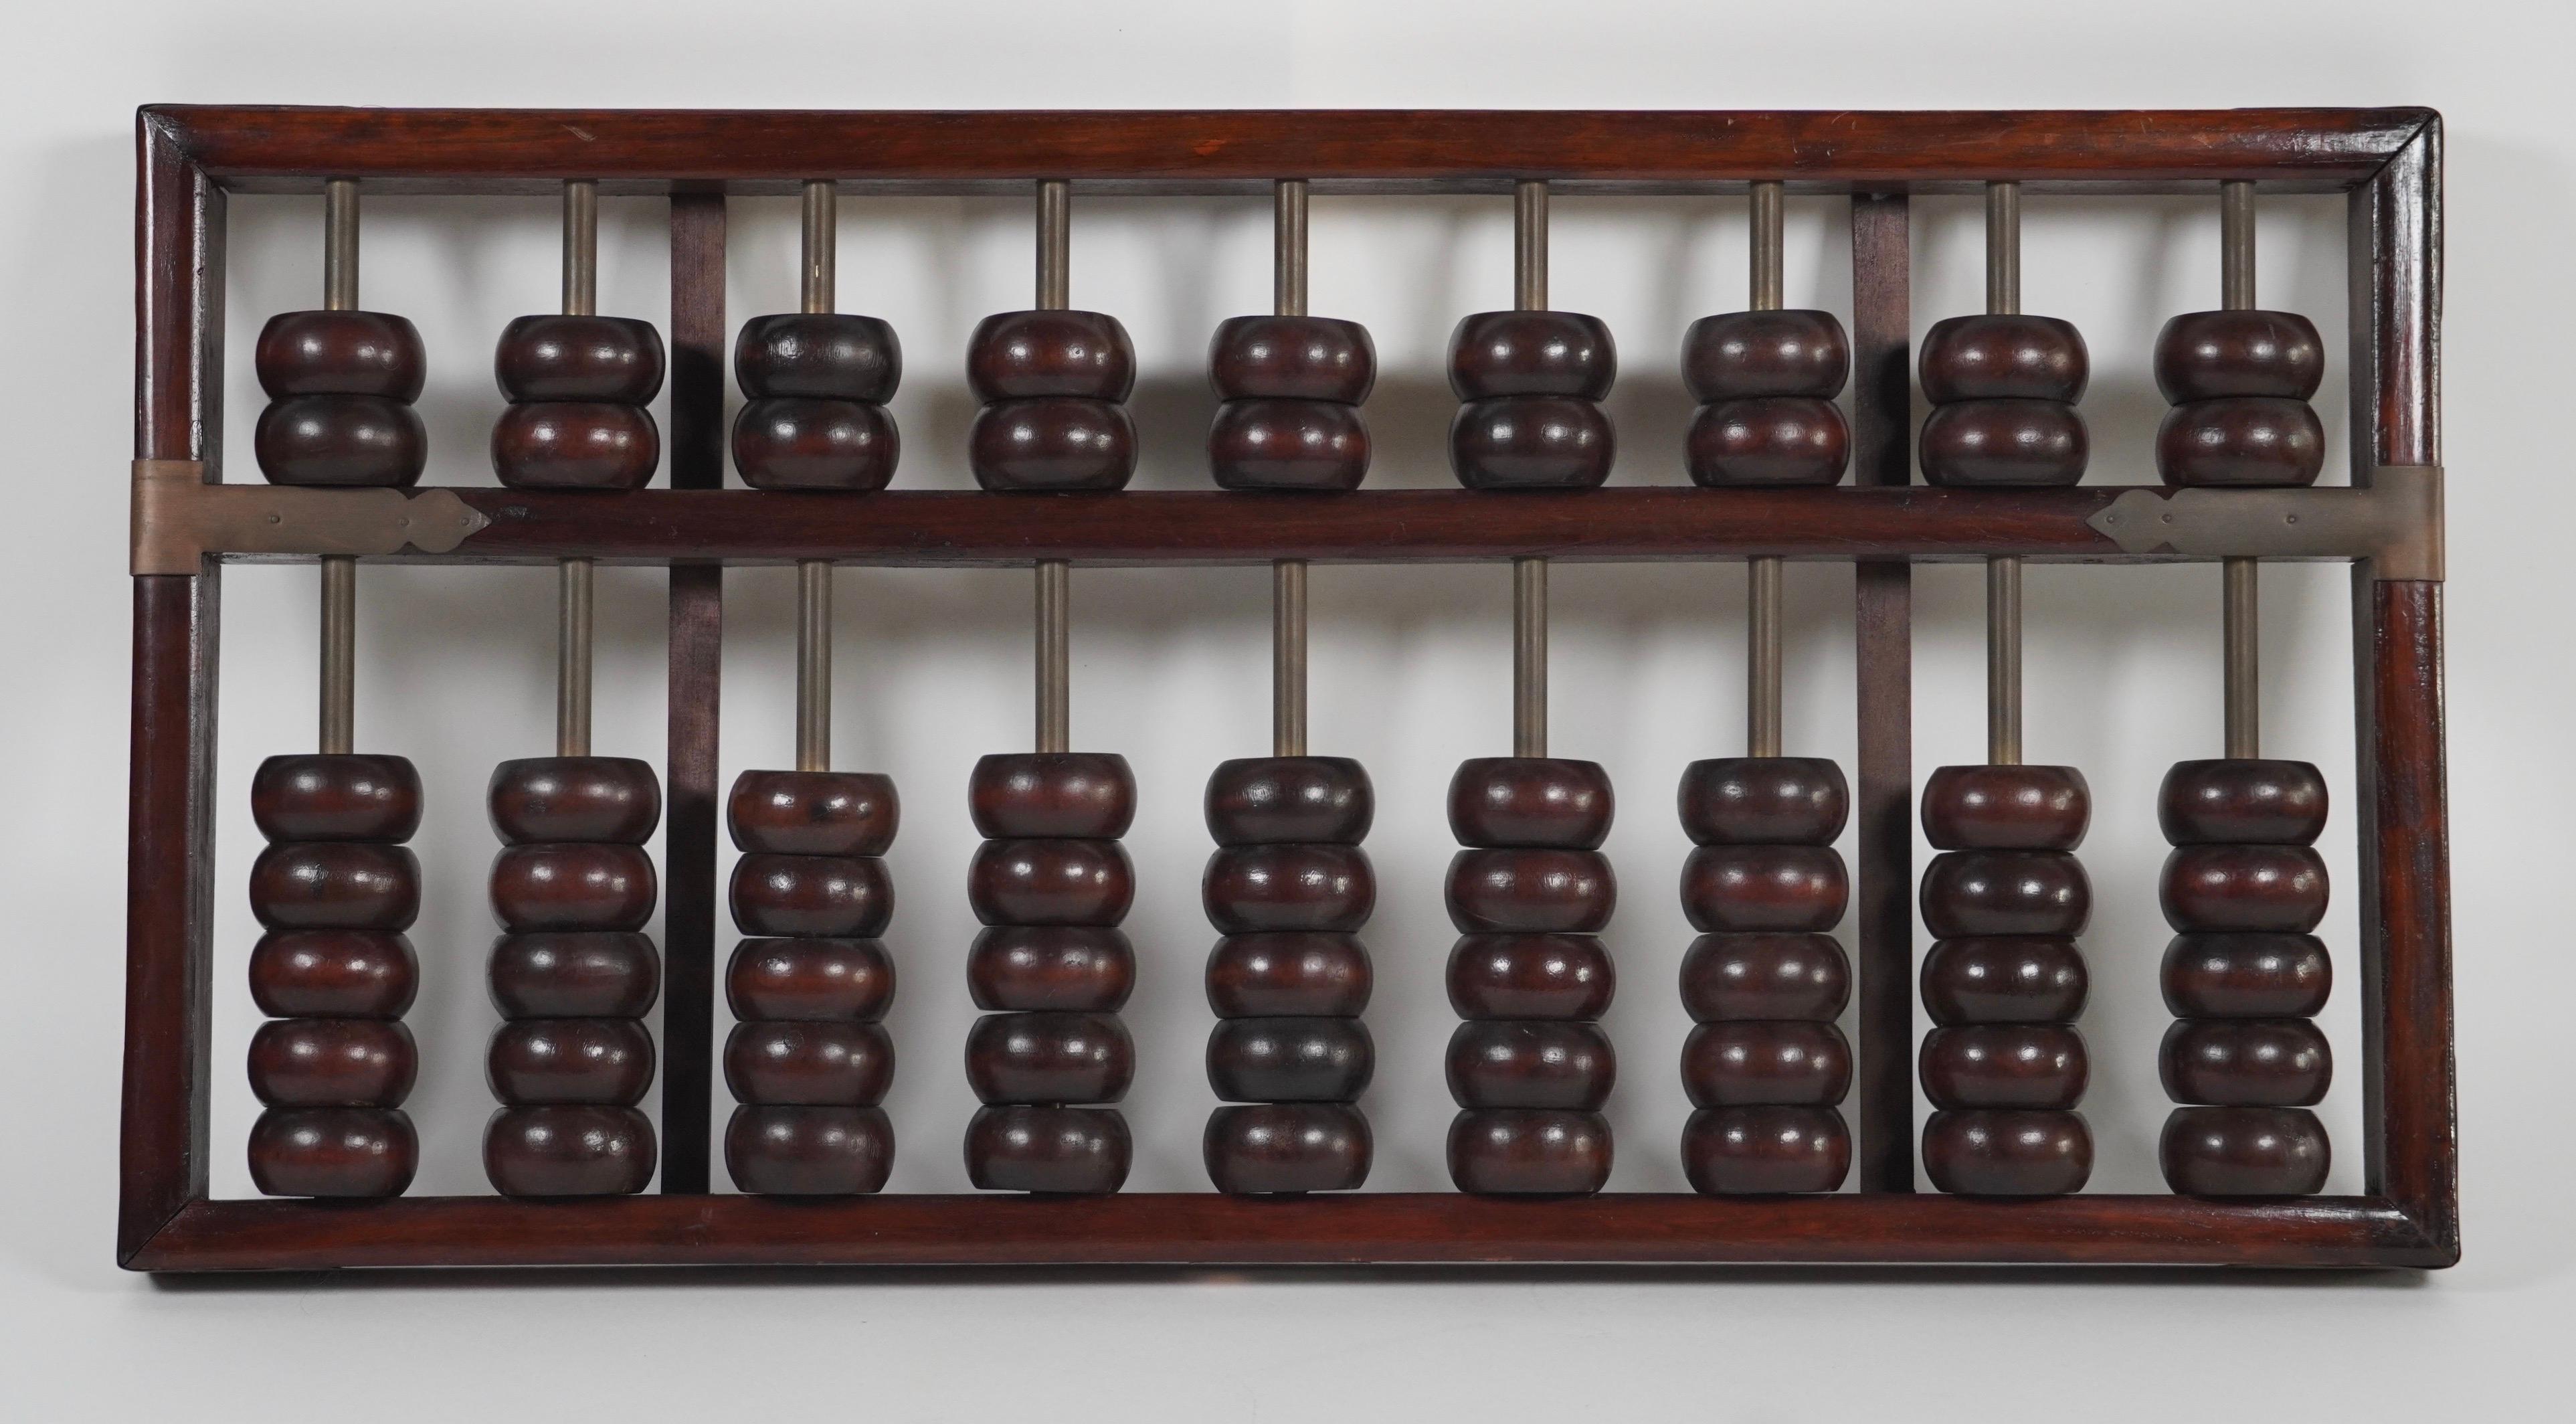 1950s to 1960s School room teaching aid oversized abacus made by Lotus-Flower Brand with rosewood stained wood and brass accents / fasteners. This was designed to be seen in the back of the classroom to teach the students how to use the abacus